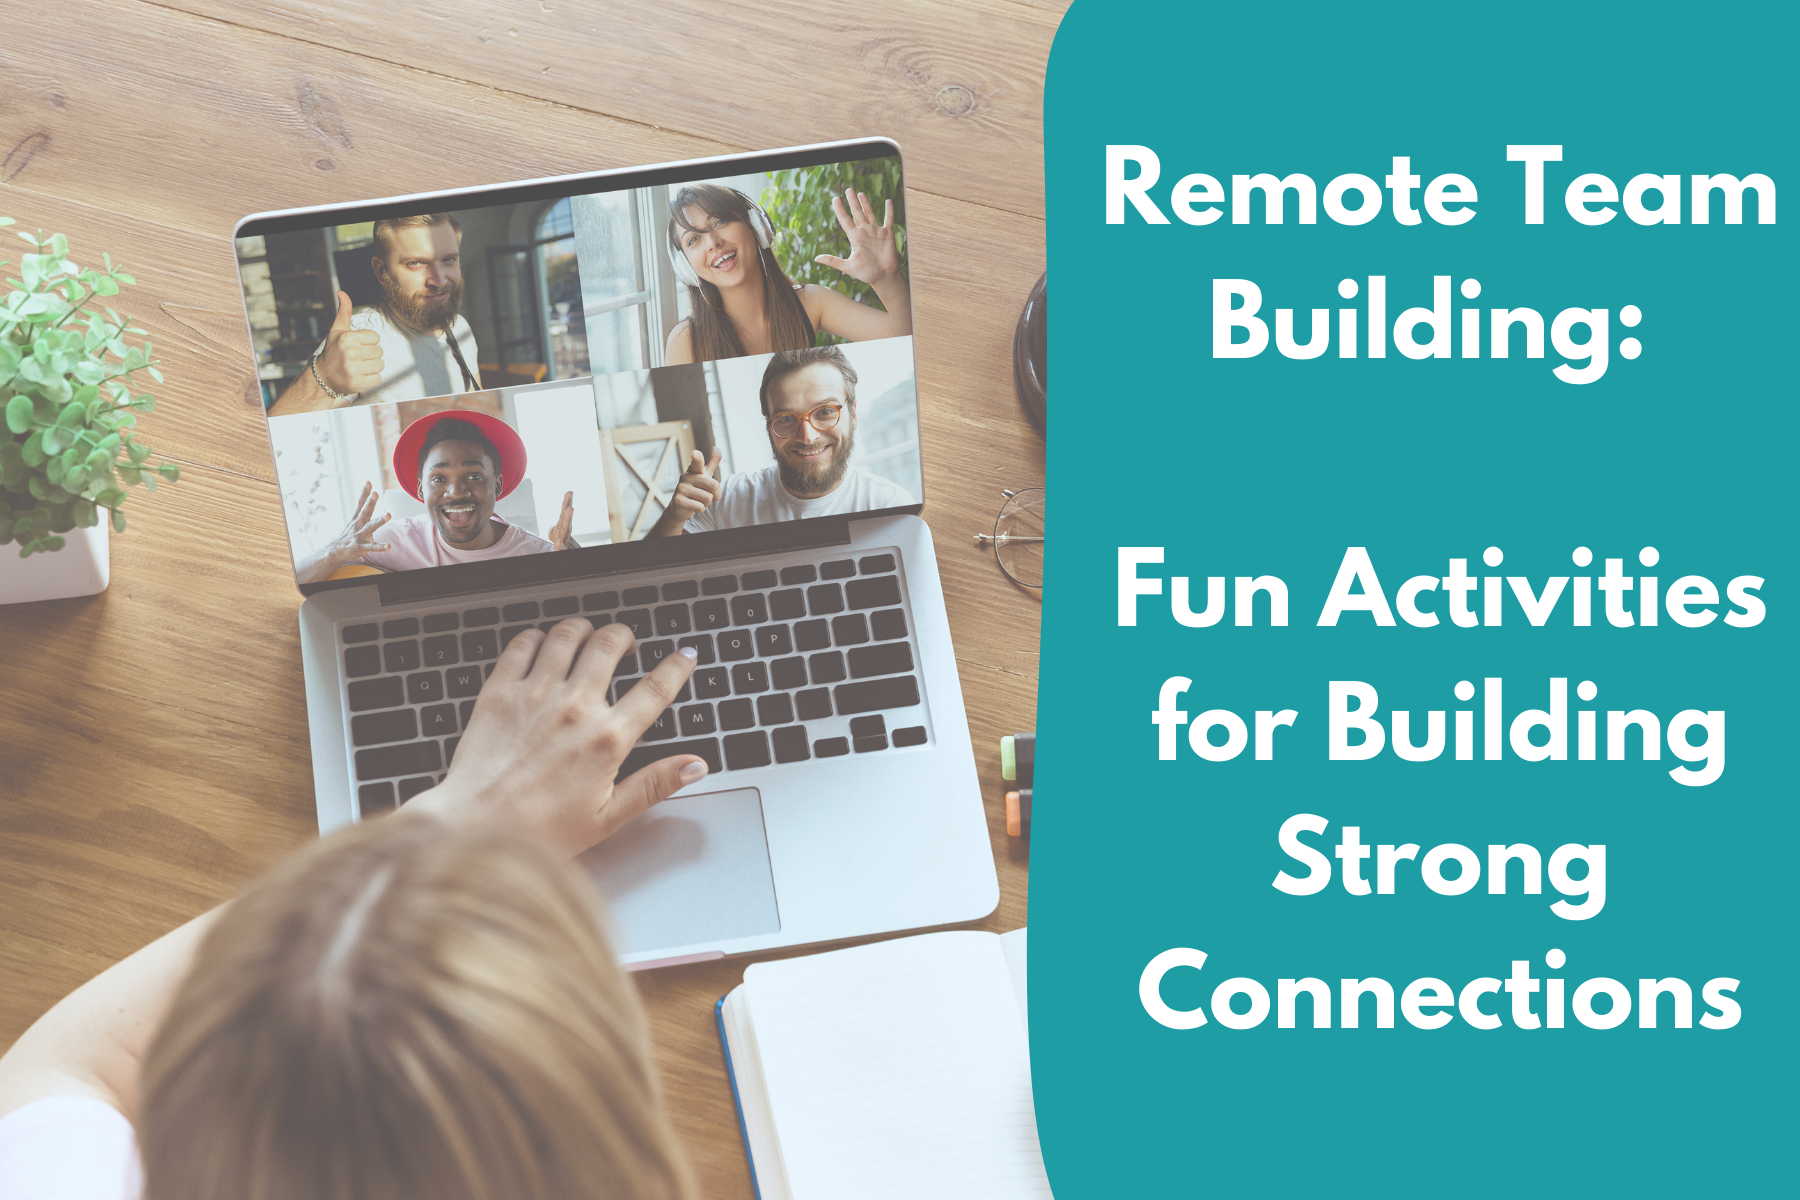 Remote Team Building: Fun Activities for Building Strong Connections